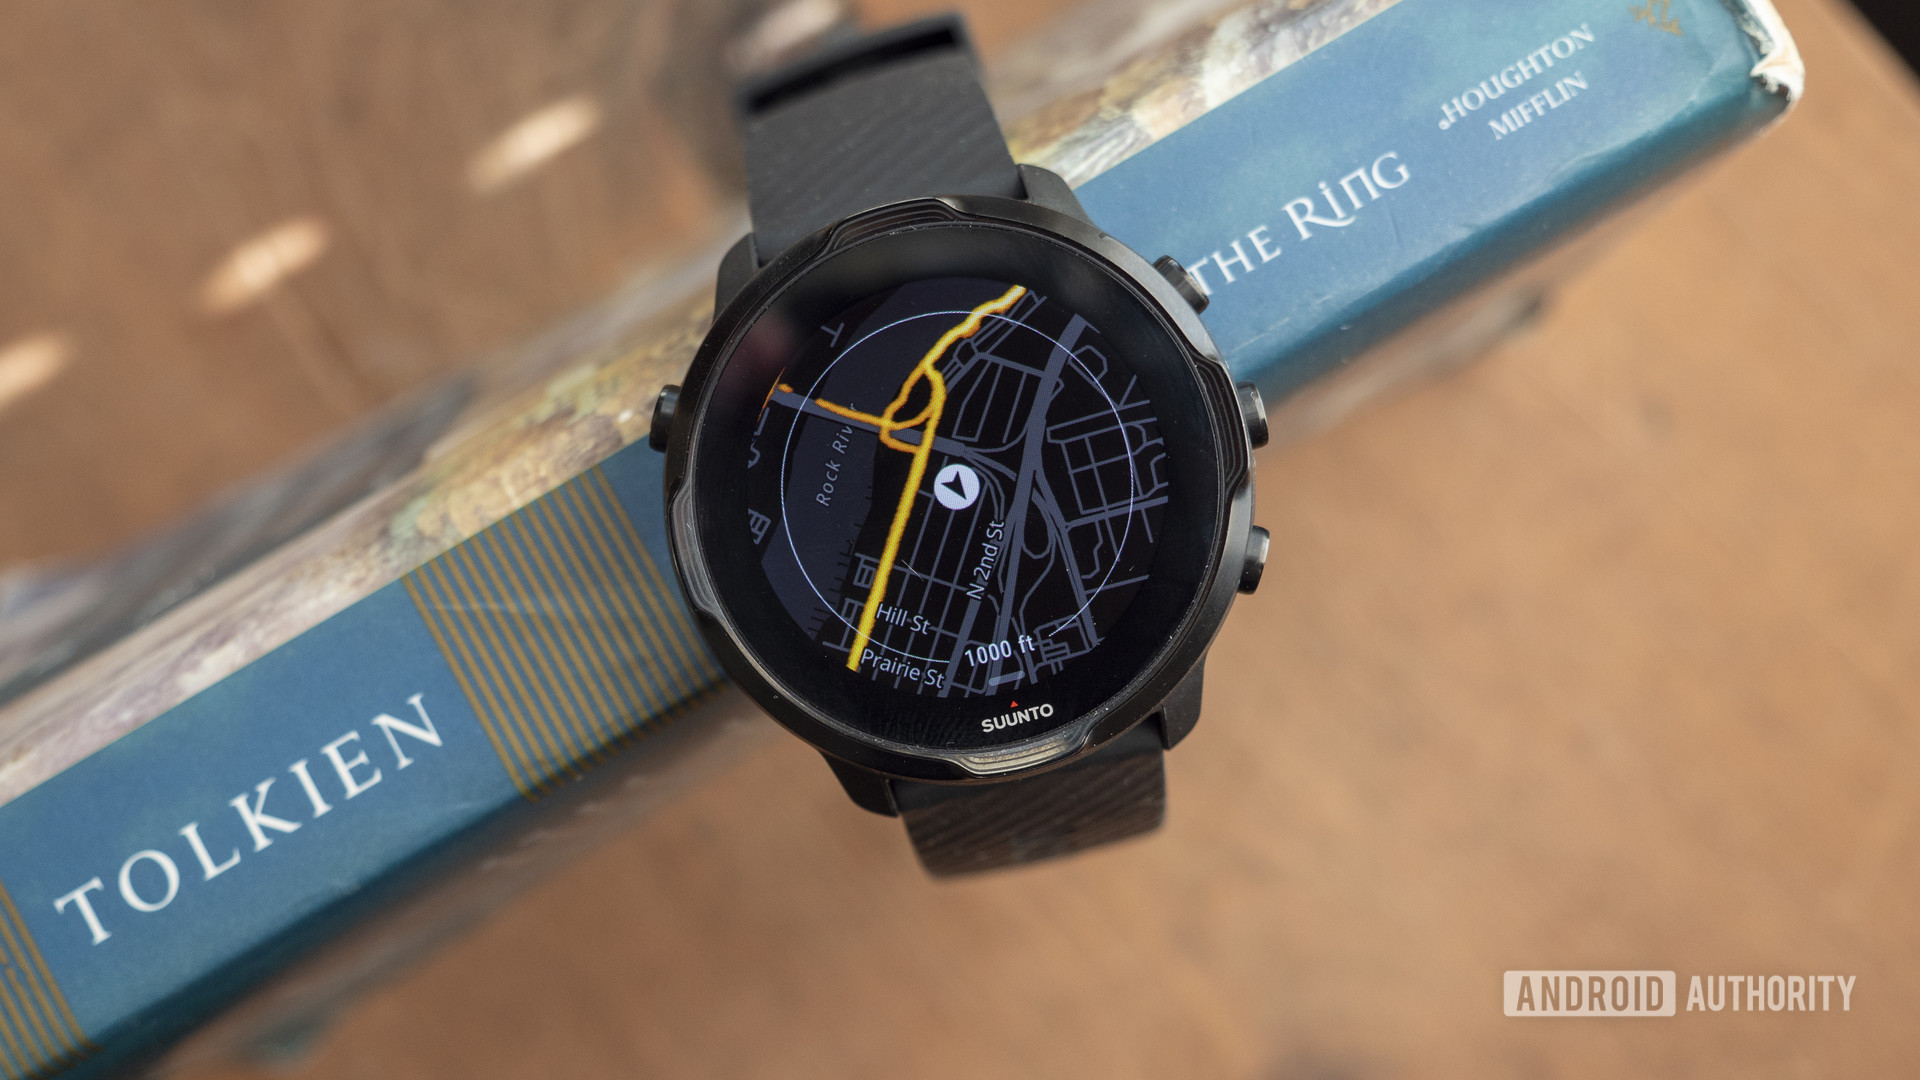 A Suunto 7 rests on a book with the display showing the heatmaps feature.